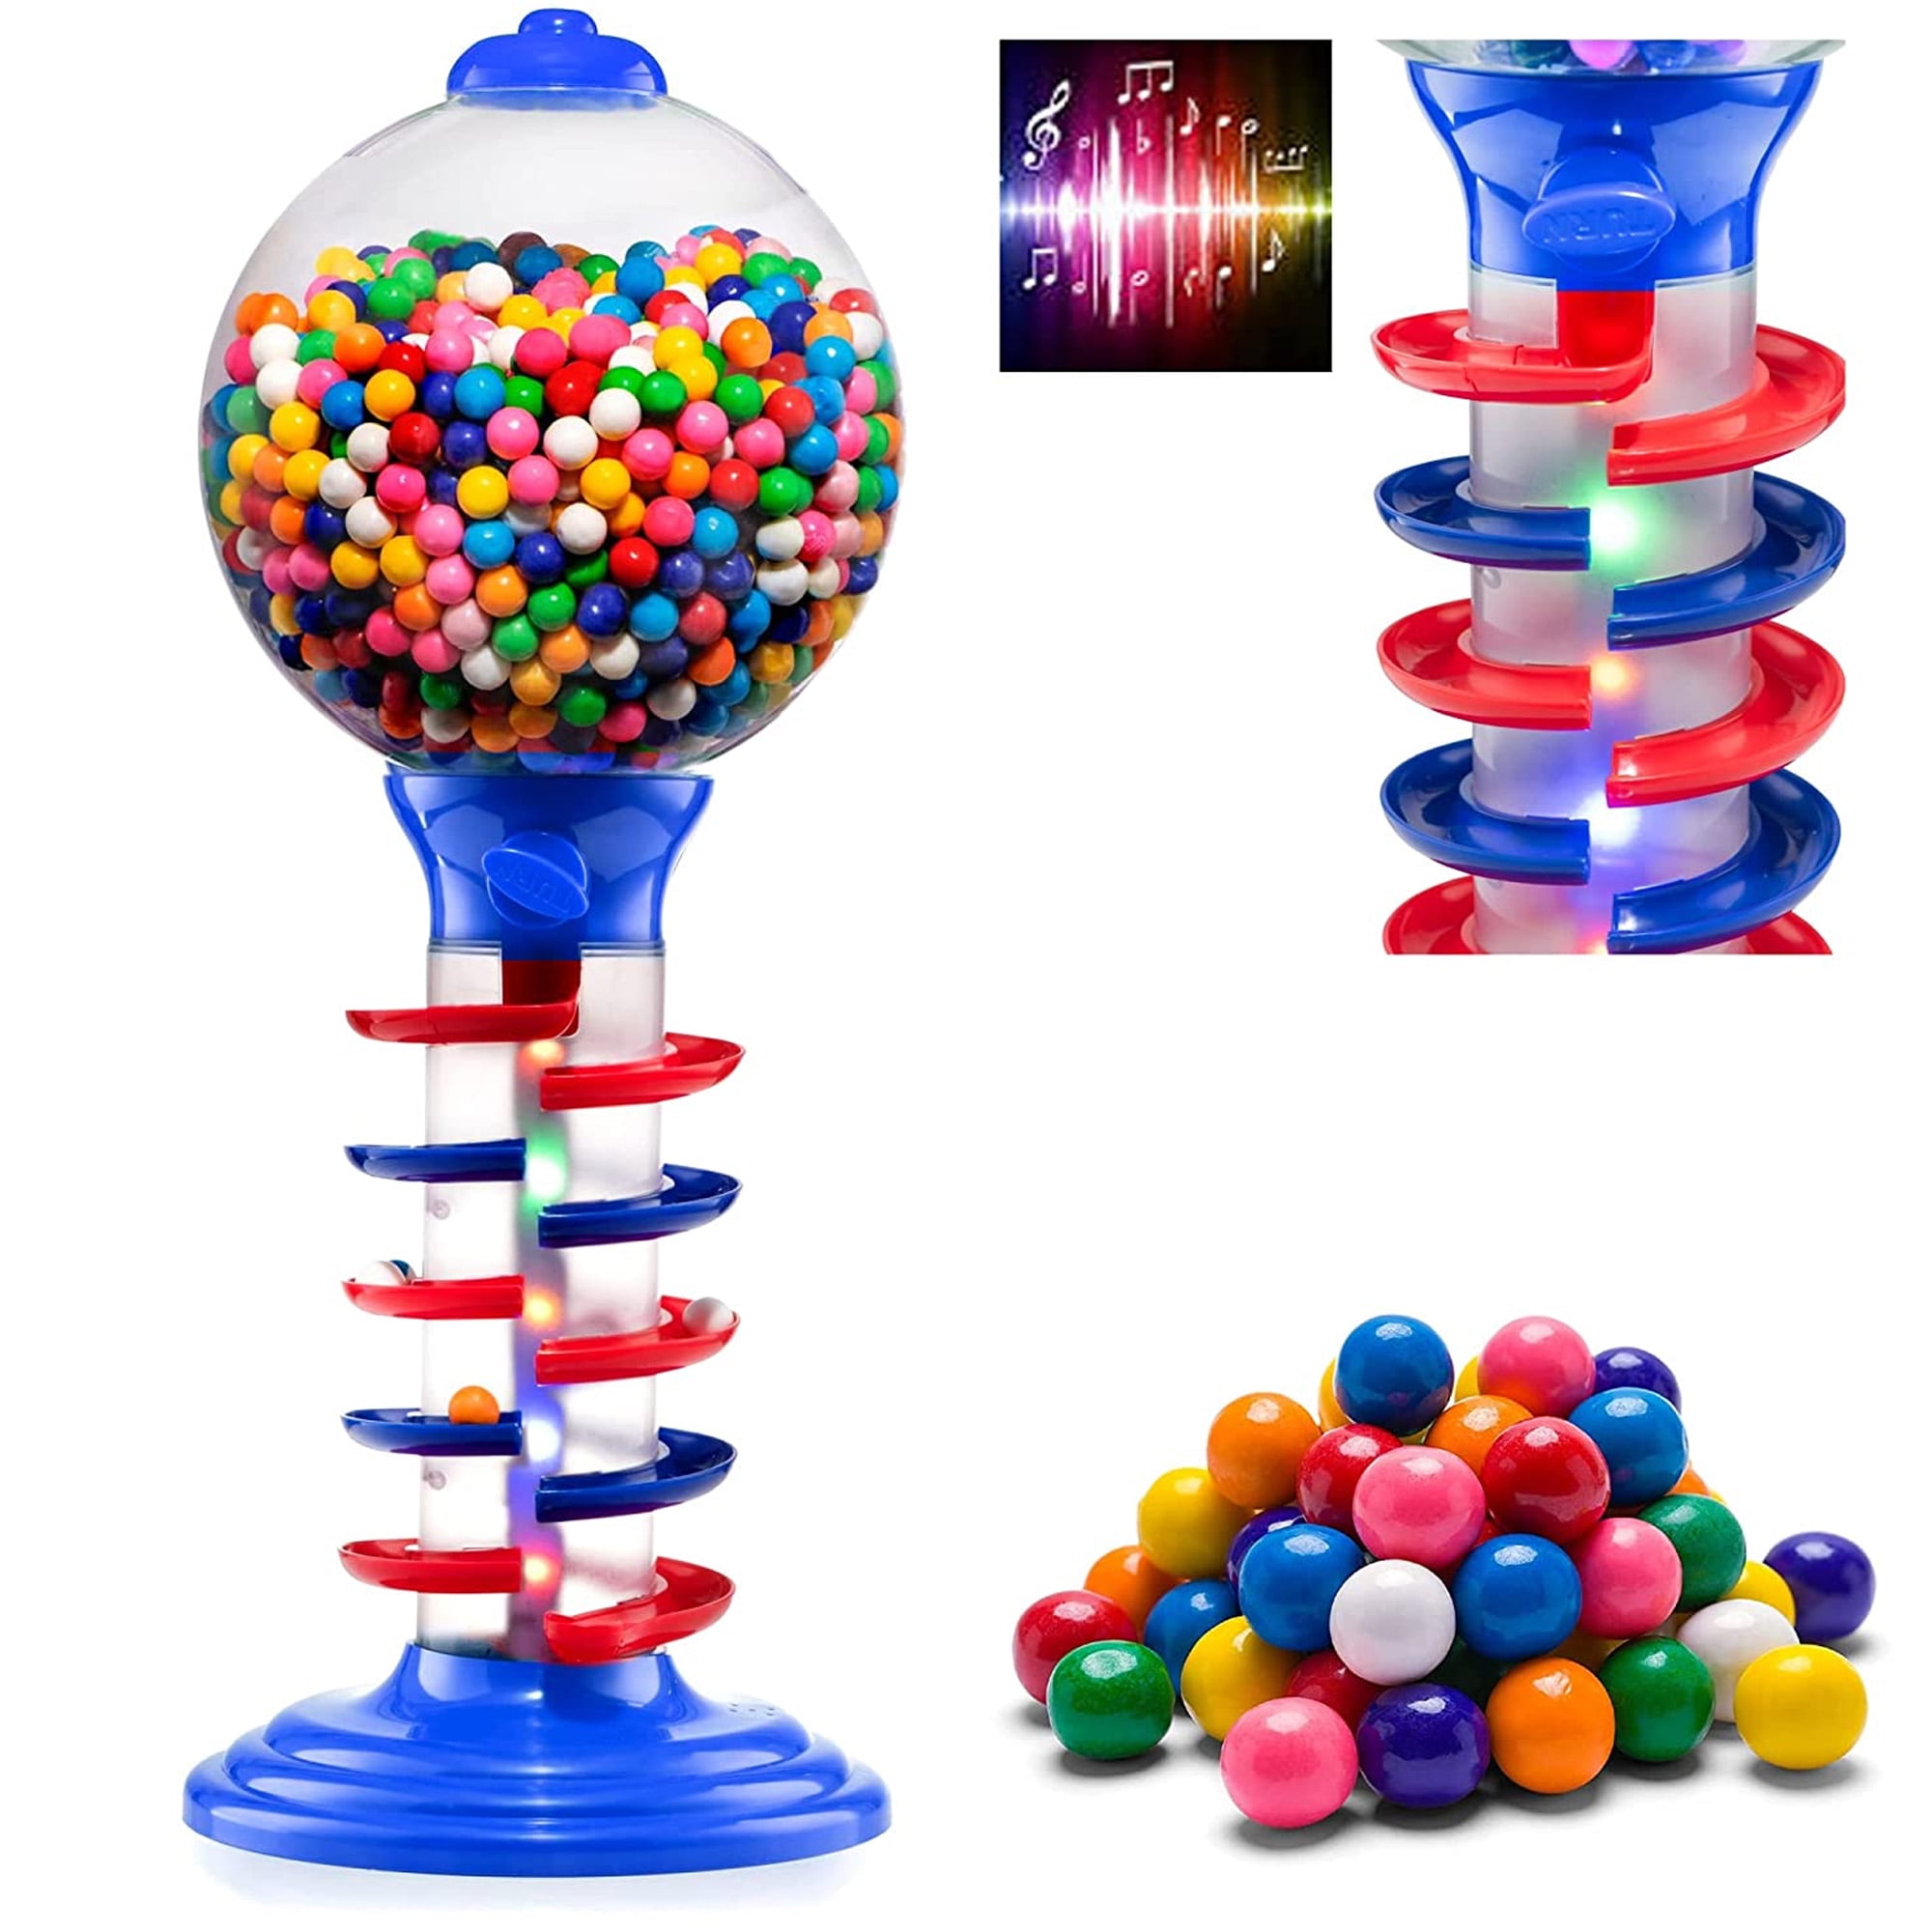 Playo 21 Light & Sound Gumball Machine for Kids with 113 Pcs